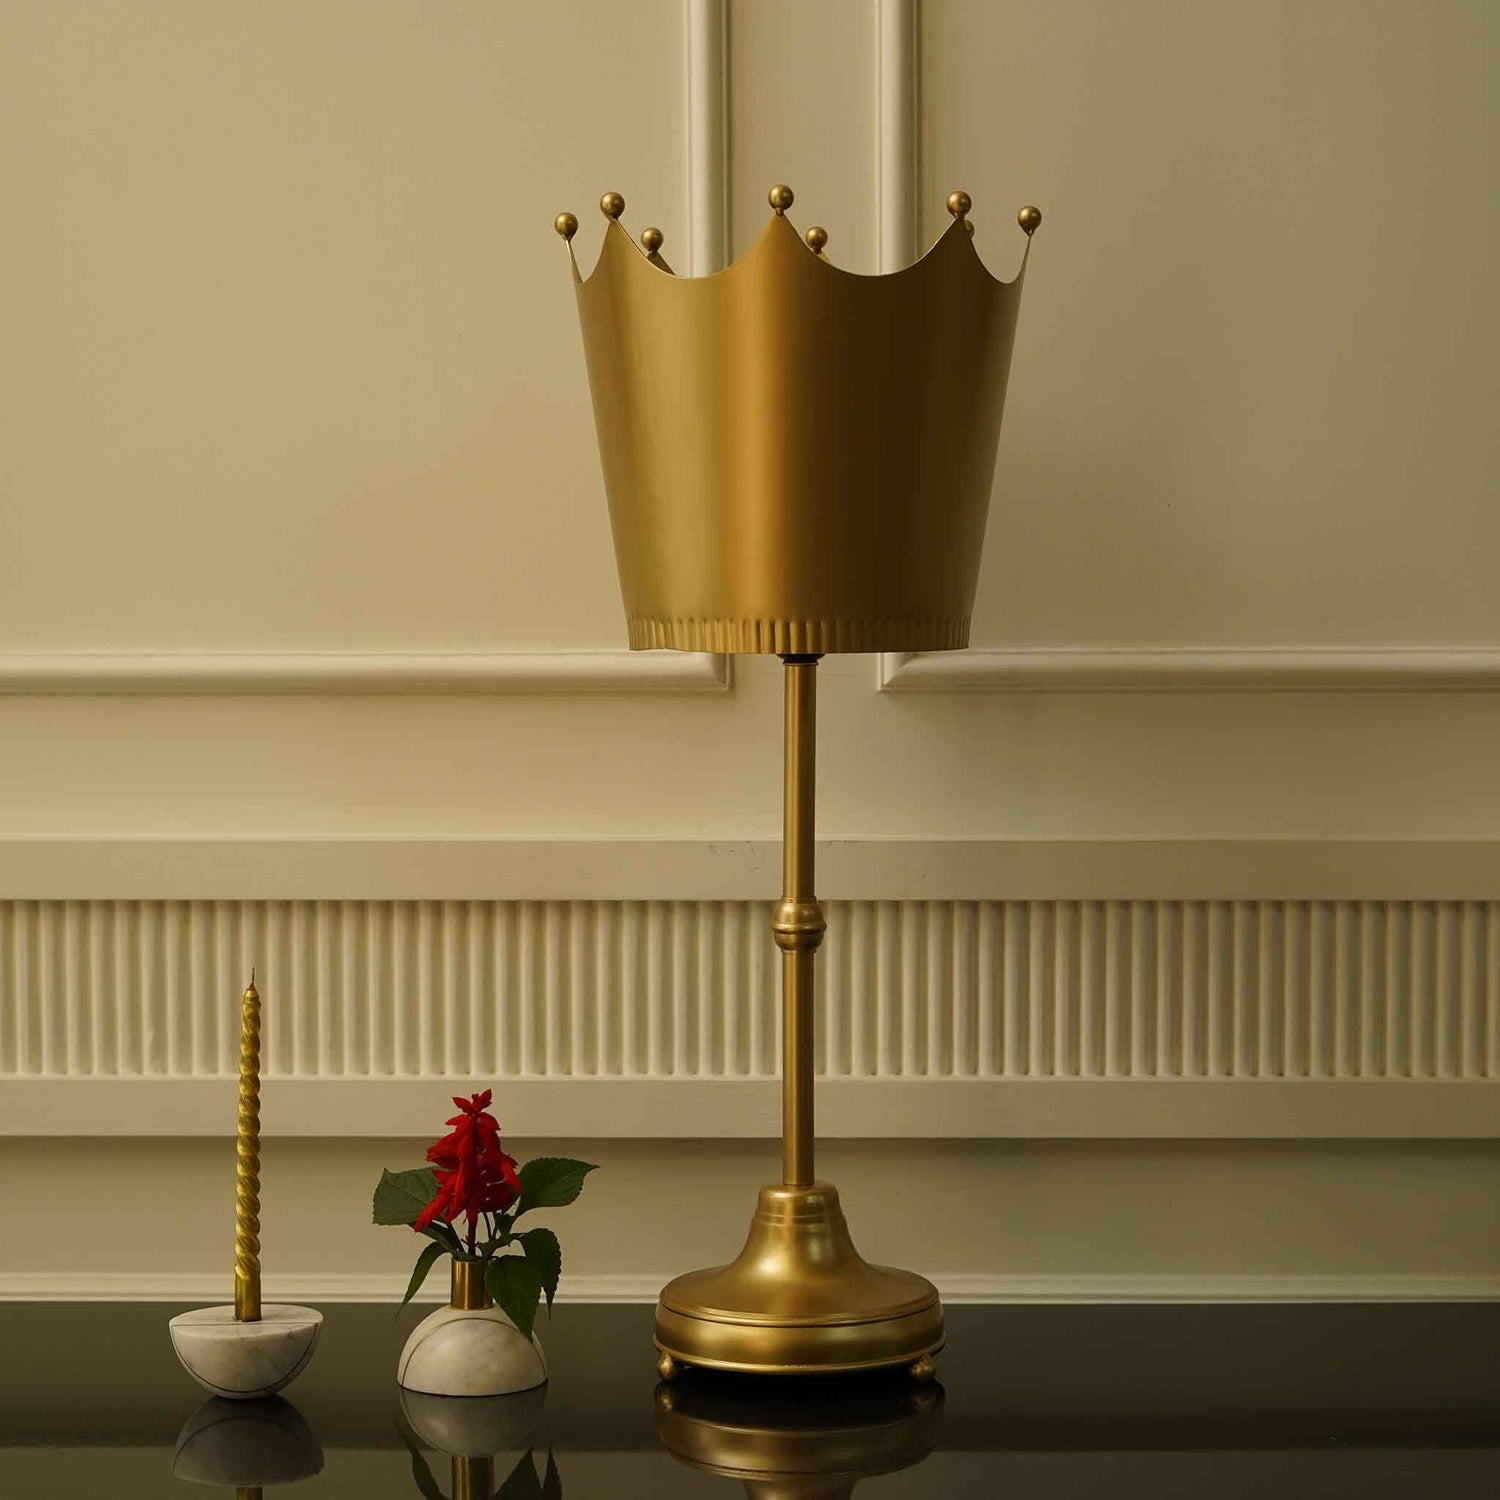 Imperial design golden metallic table lamp with a crown shaped shade.